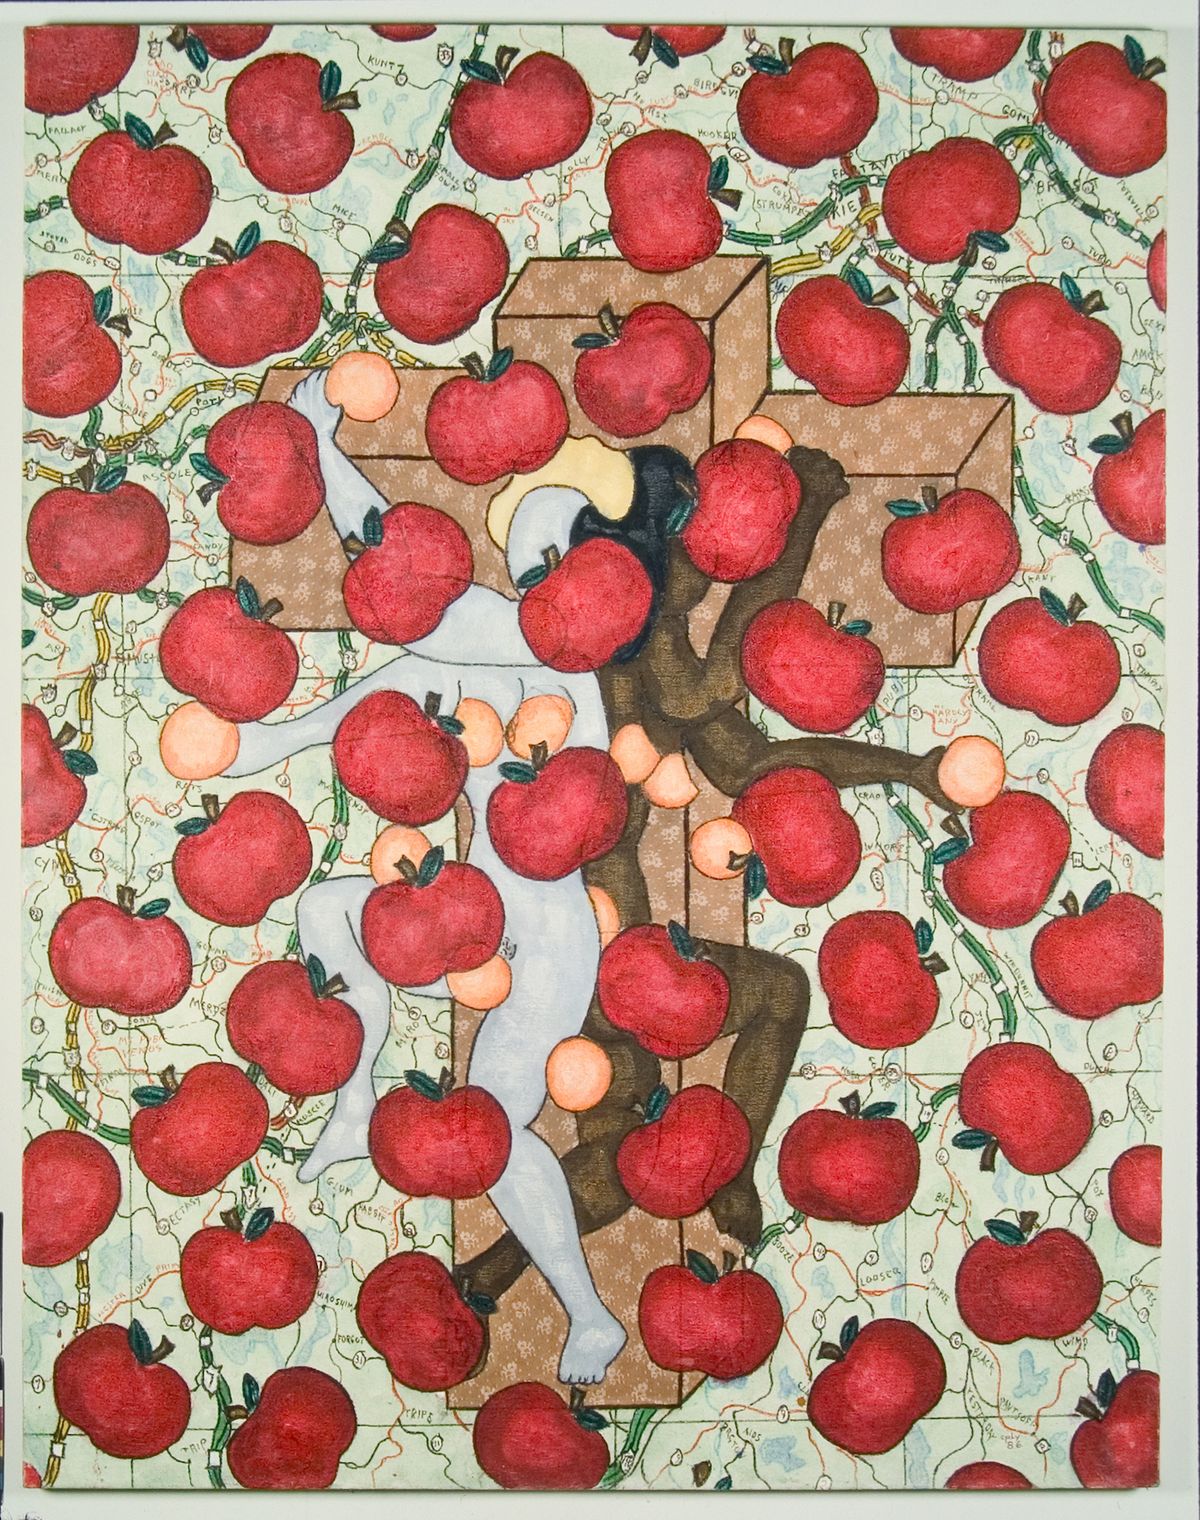 William N. Copley, Untitled (Apples & Oranges) (1986) © 2020 William N. Copley Estate / Artists Rights Society (ARS), New York. Courtesy of Kasmin Gallery